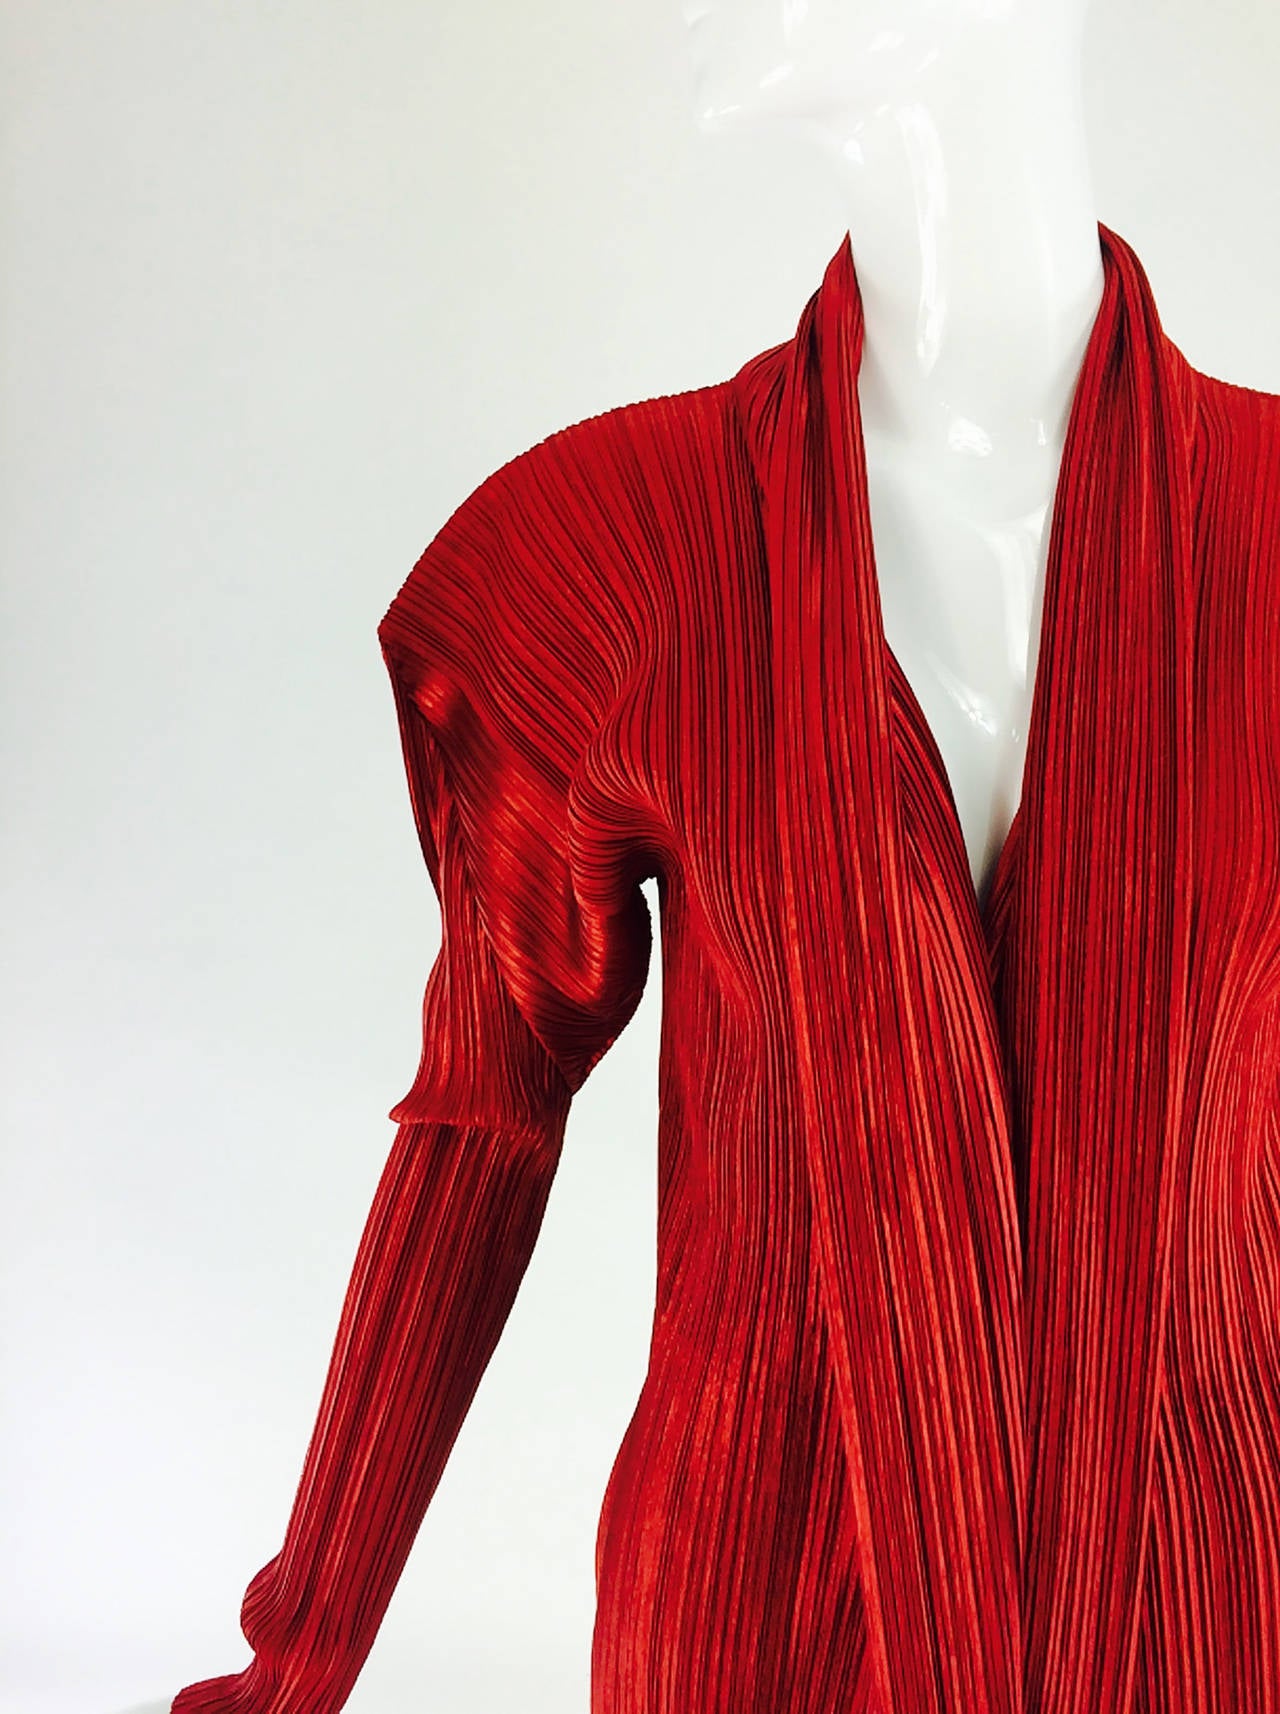 Issey Miyake pleated crimson red long jacket, with long pieced detail sleeves, deep shawl collar, closes at the front with buttons and loops...Marked size Medium...Looks barely, if ever, worn

Please check the measurements provided below and